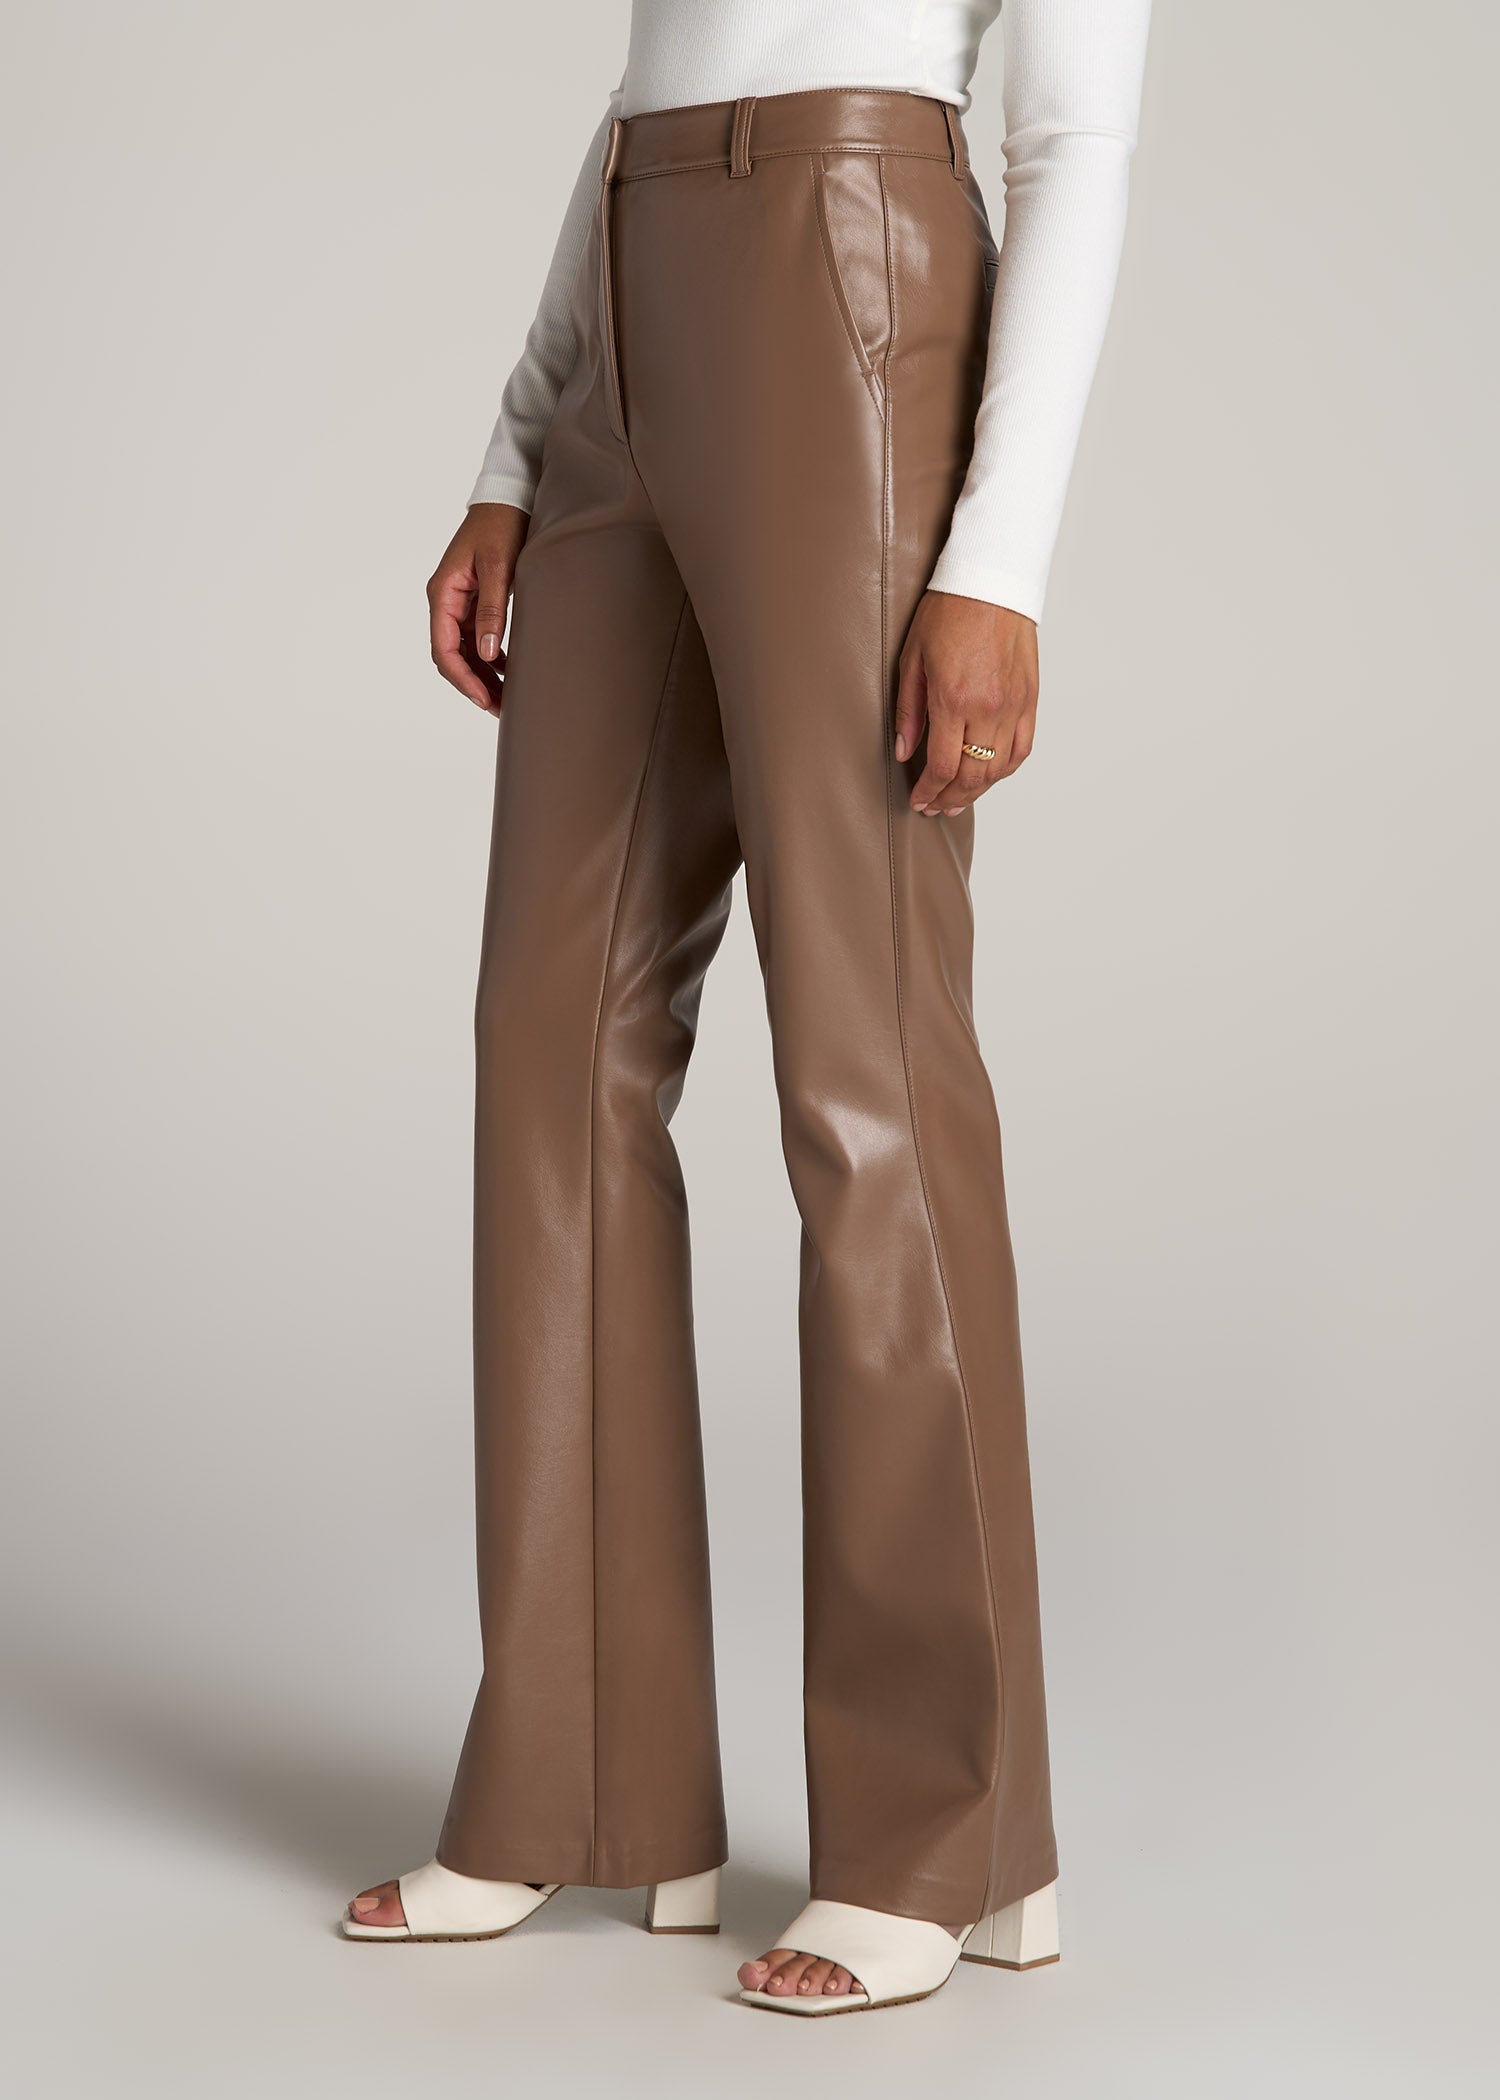 Women's Ultra High-Rise Vegan Leather Flare Pants, Women's Clearance